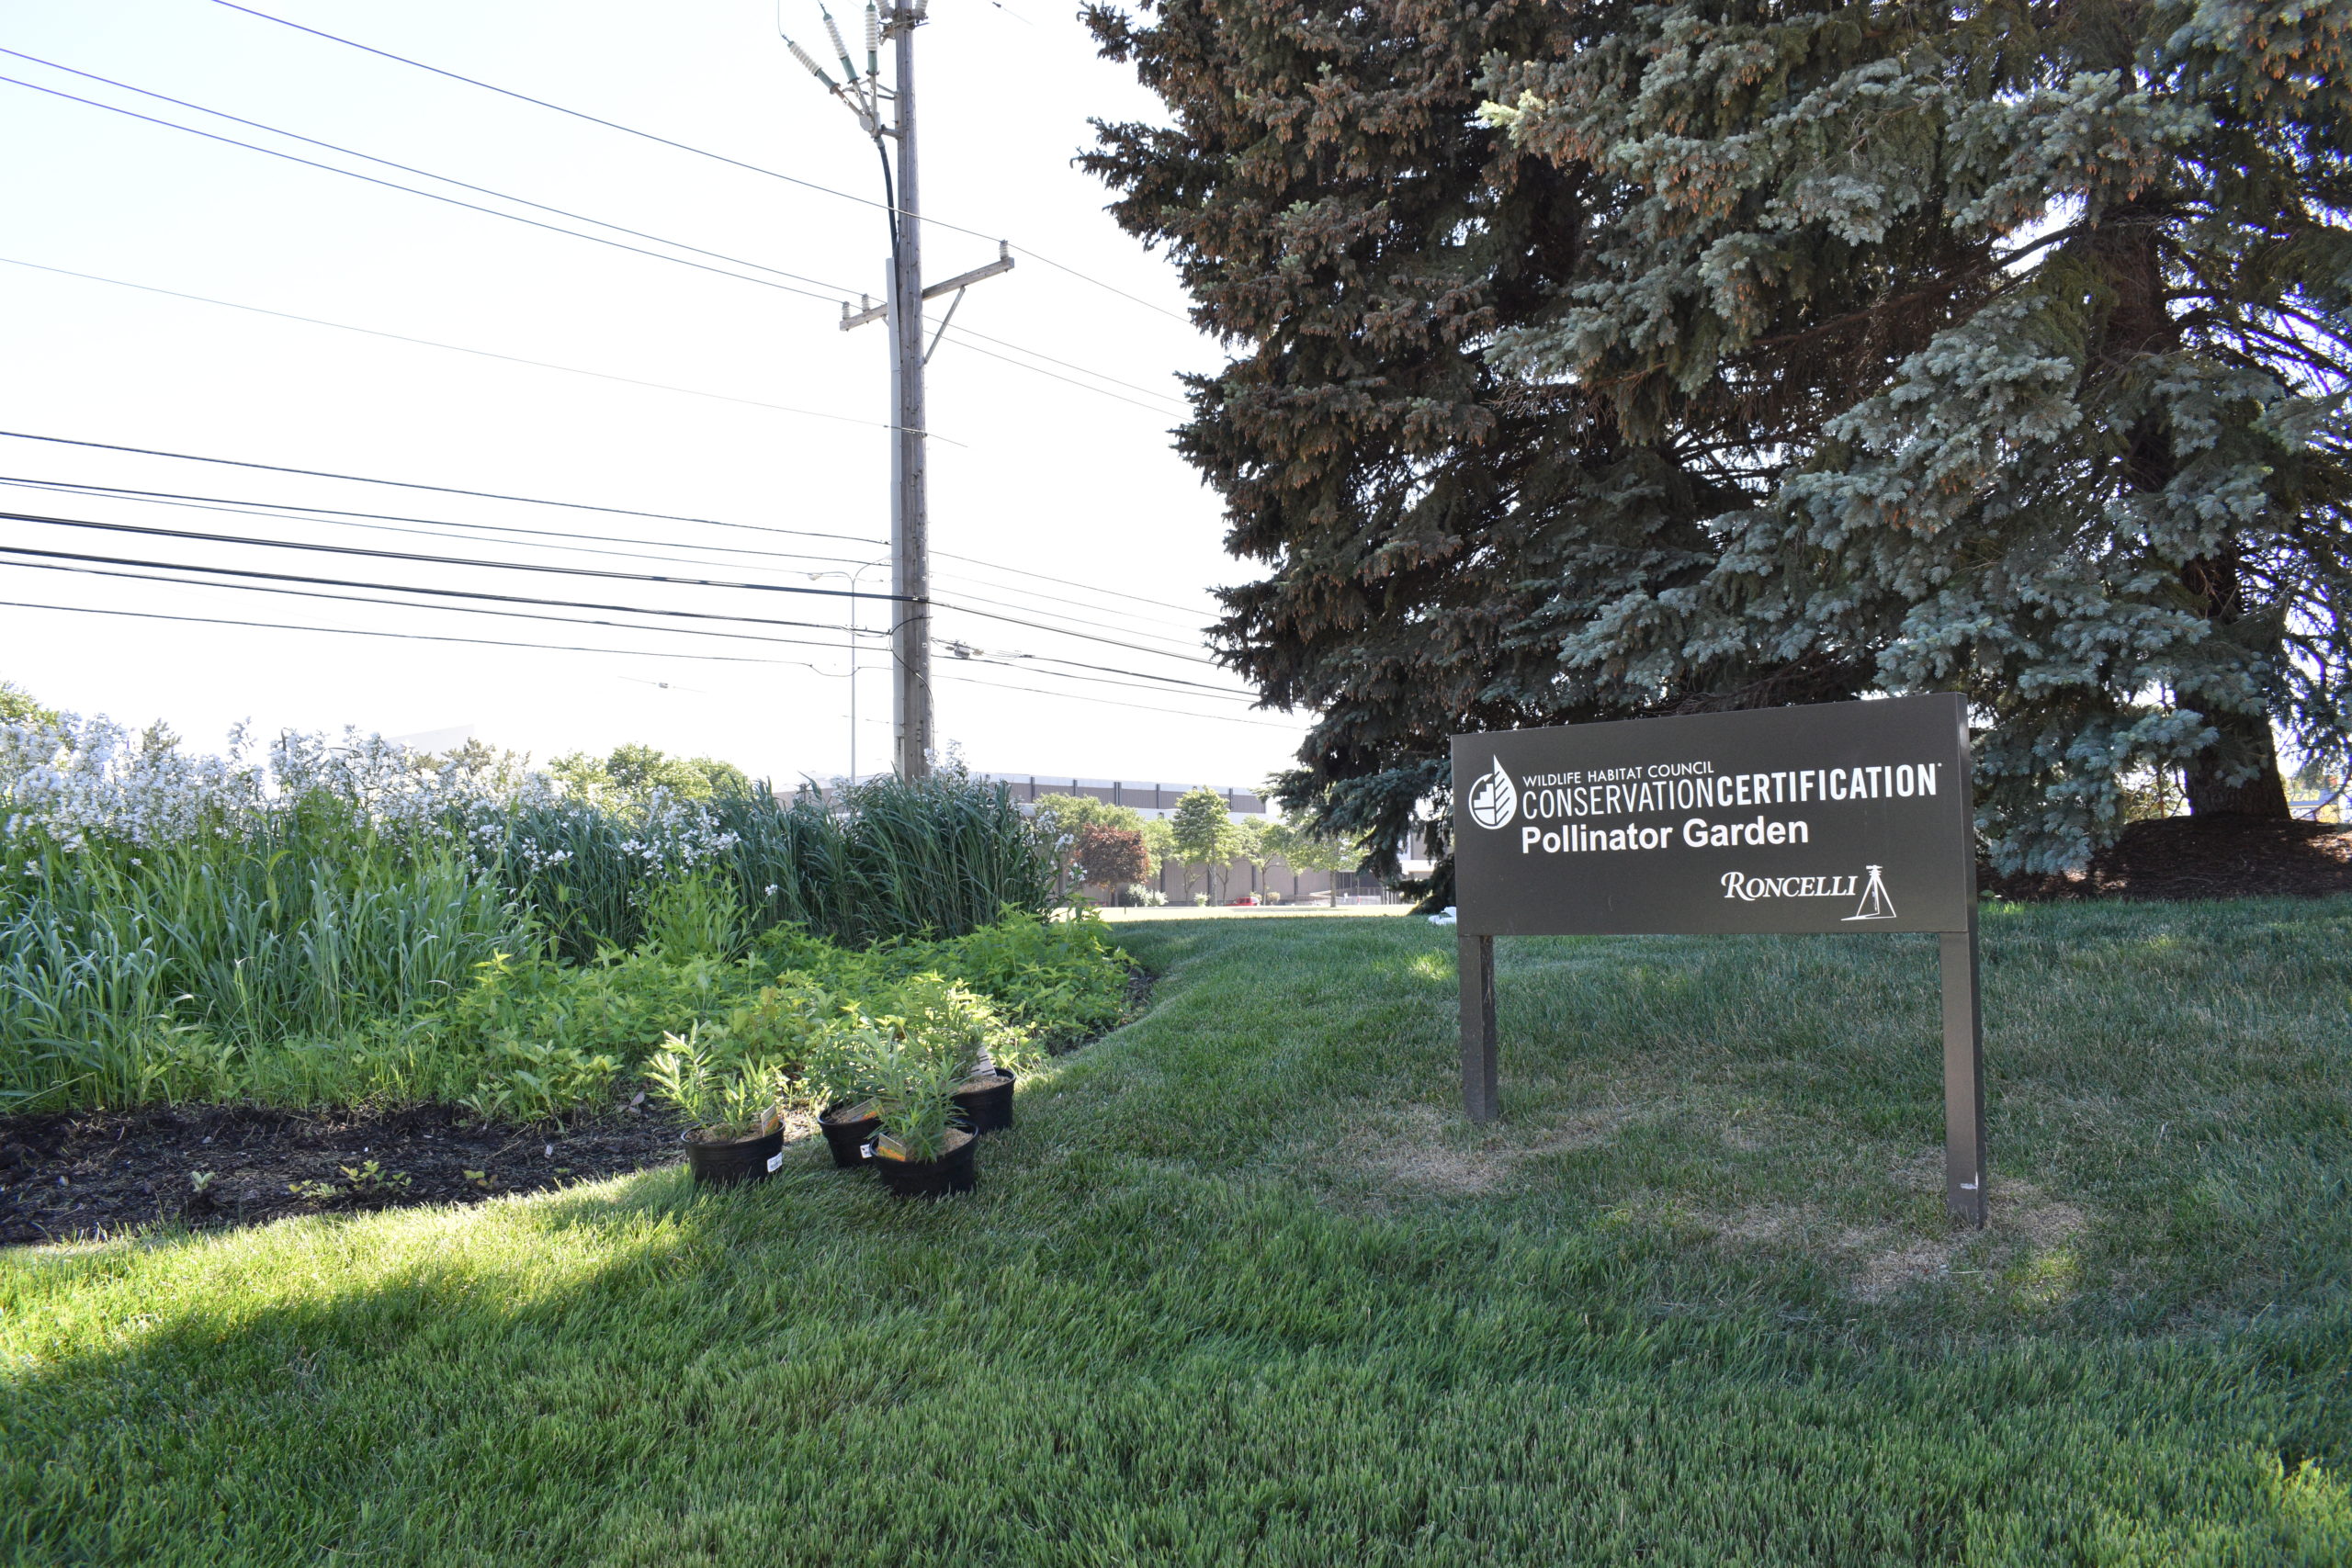 The Wildlife Habitat Council Conservation Certification Pollinator Garden sign and garden at Roncelli's headquarters in Sterling Heights, Mich.